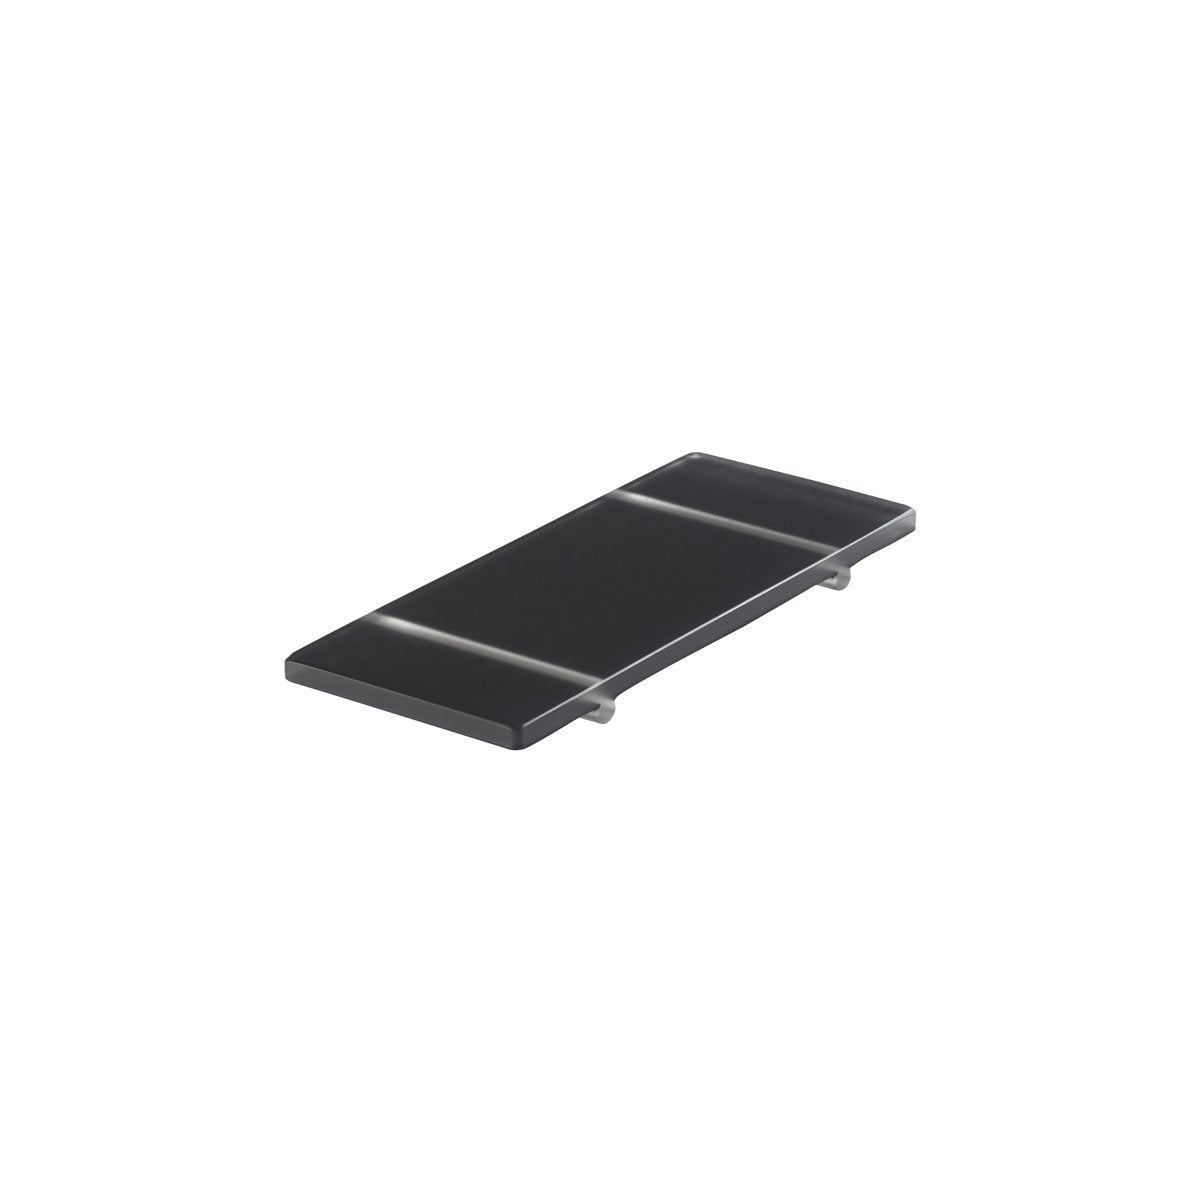 MLP111002 Mealplak Footed Tray Anthracite 245x100x15mm Tomkin Australia Hospitality Supplies